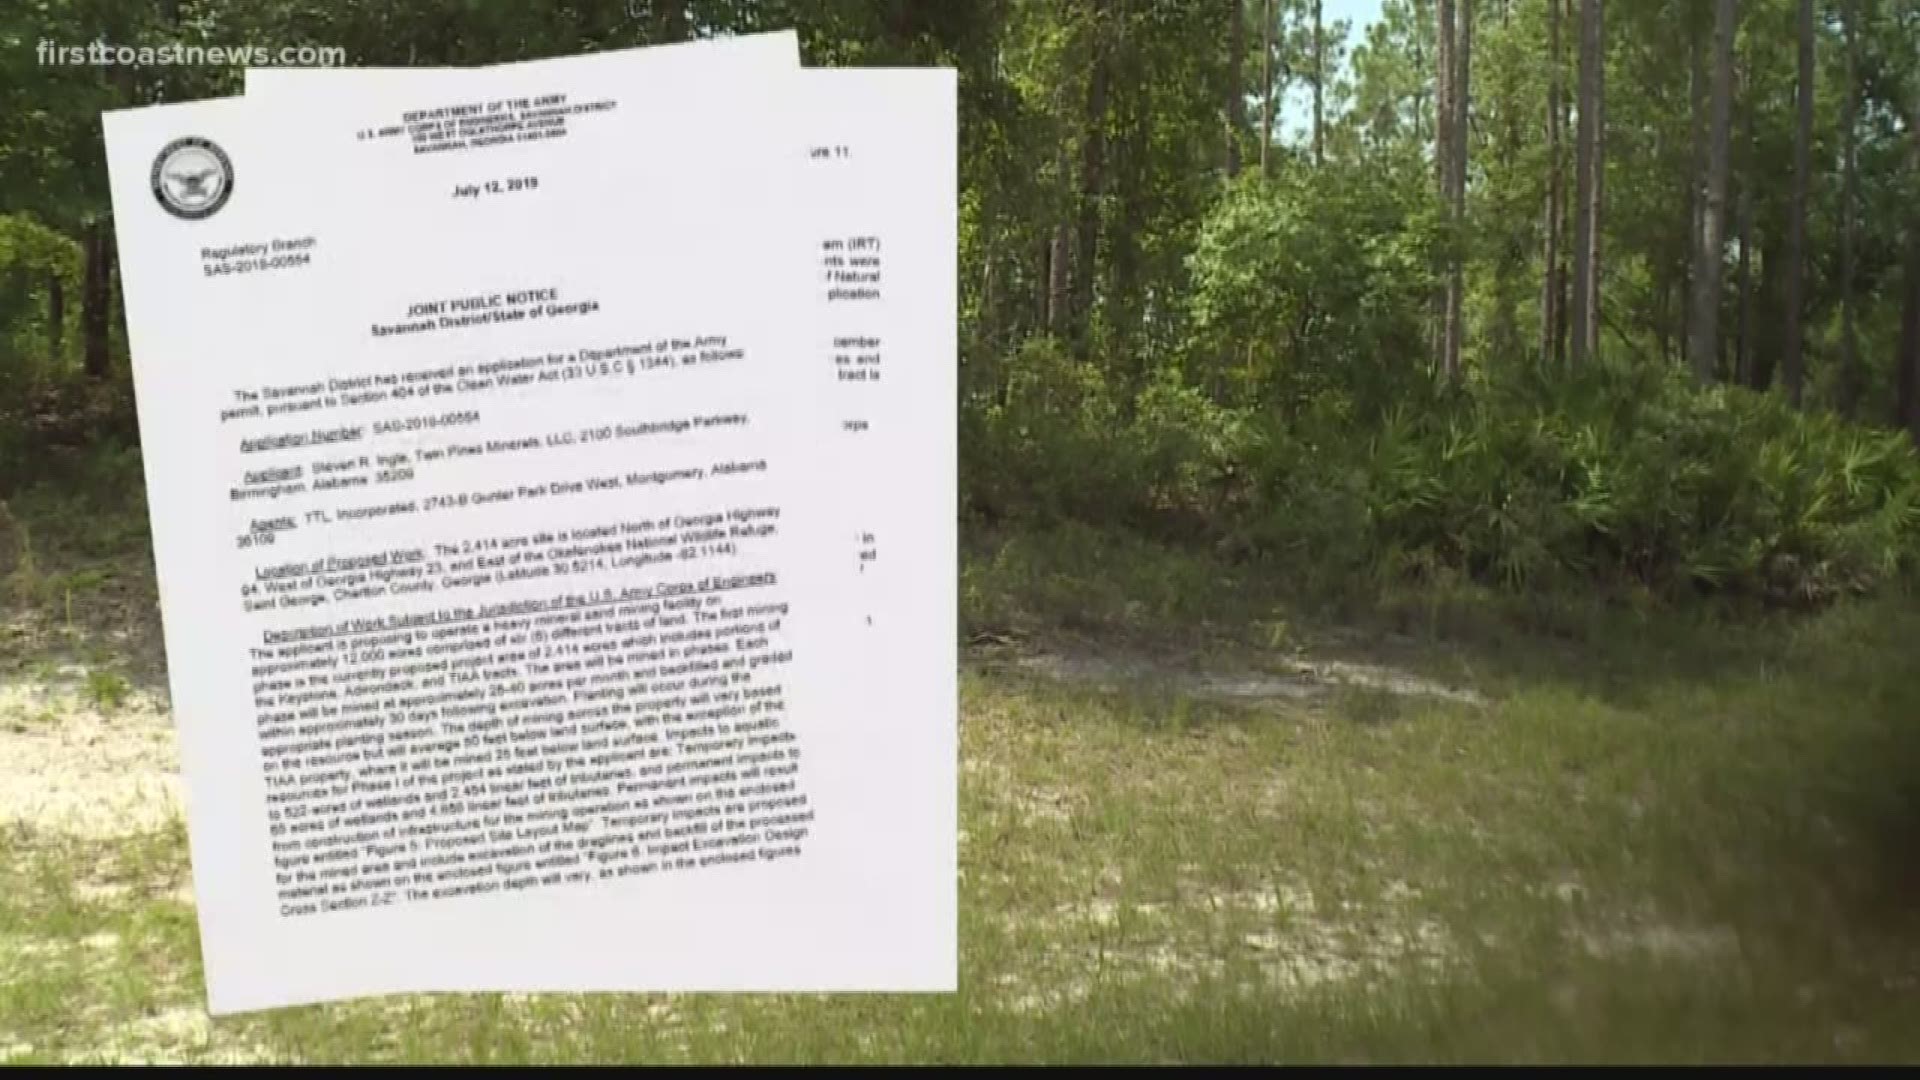 An Alabama company applied for a permit with the Army Corps of Engineers to mine the area for titanium.